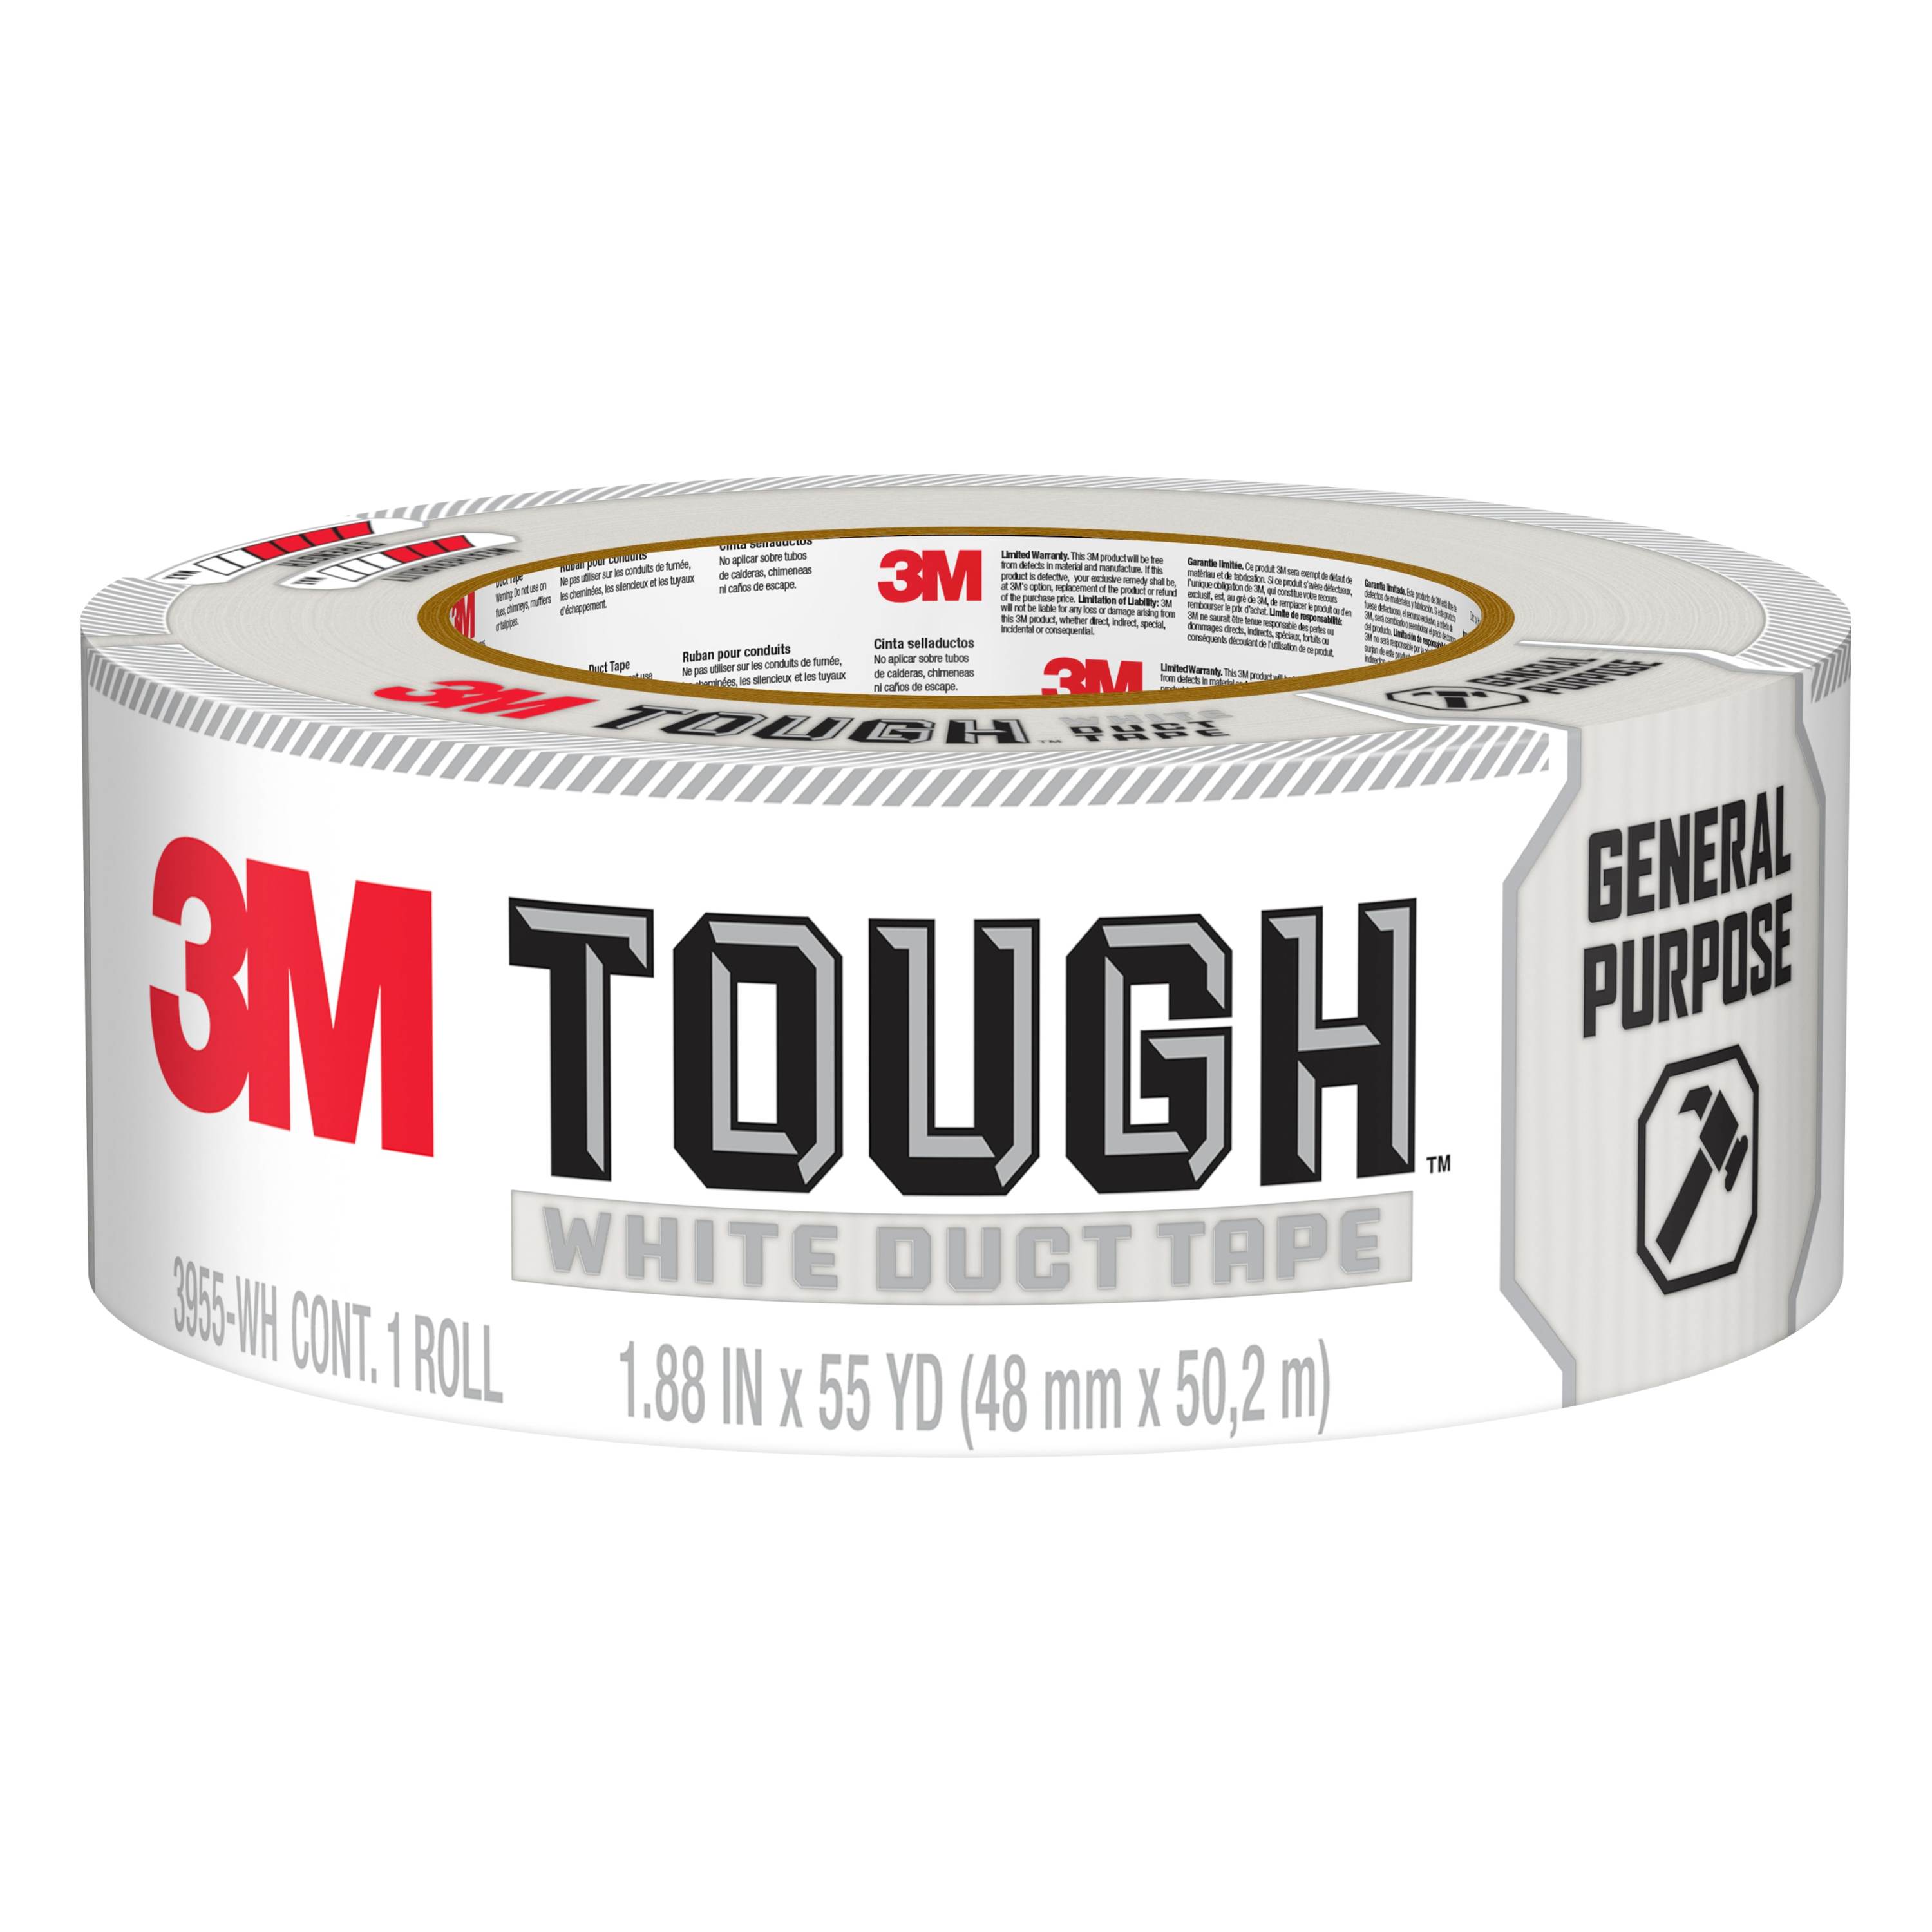 3M™ Tough Duct Tape 3955-WH - 1.88 in x 55 yd, White, 12 rls/cs